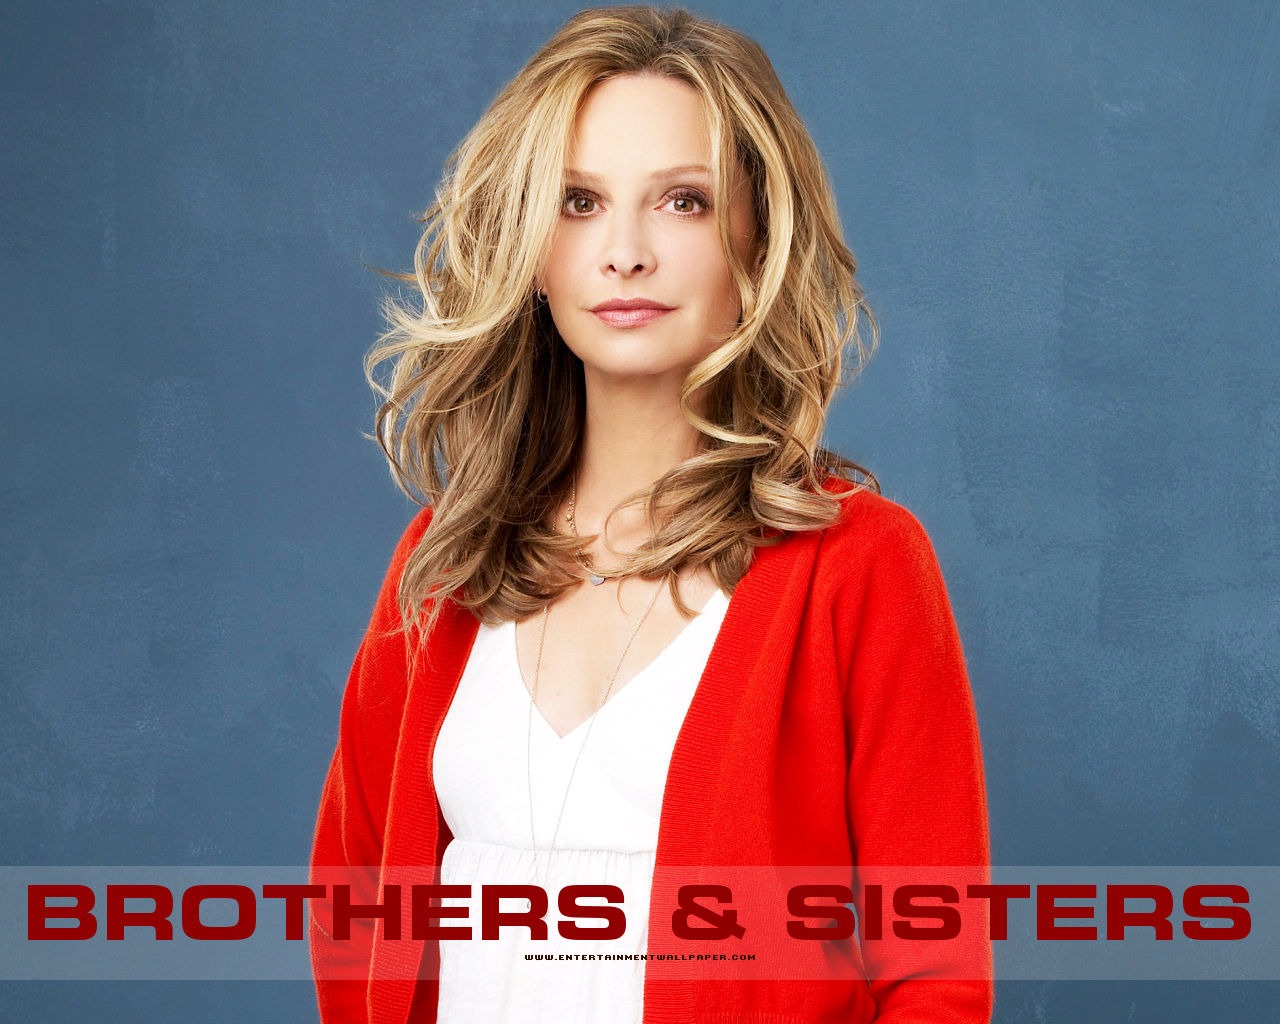 Brothers & Sisters 兄弟姐妹10 - 1280x1024